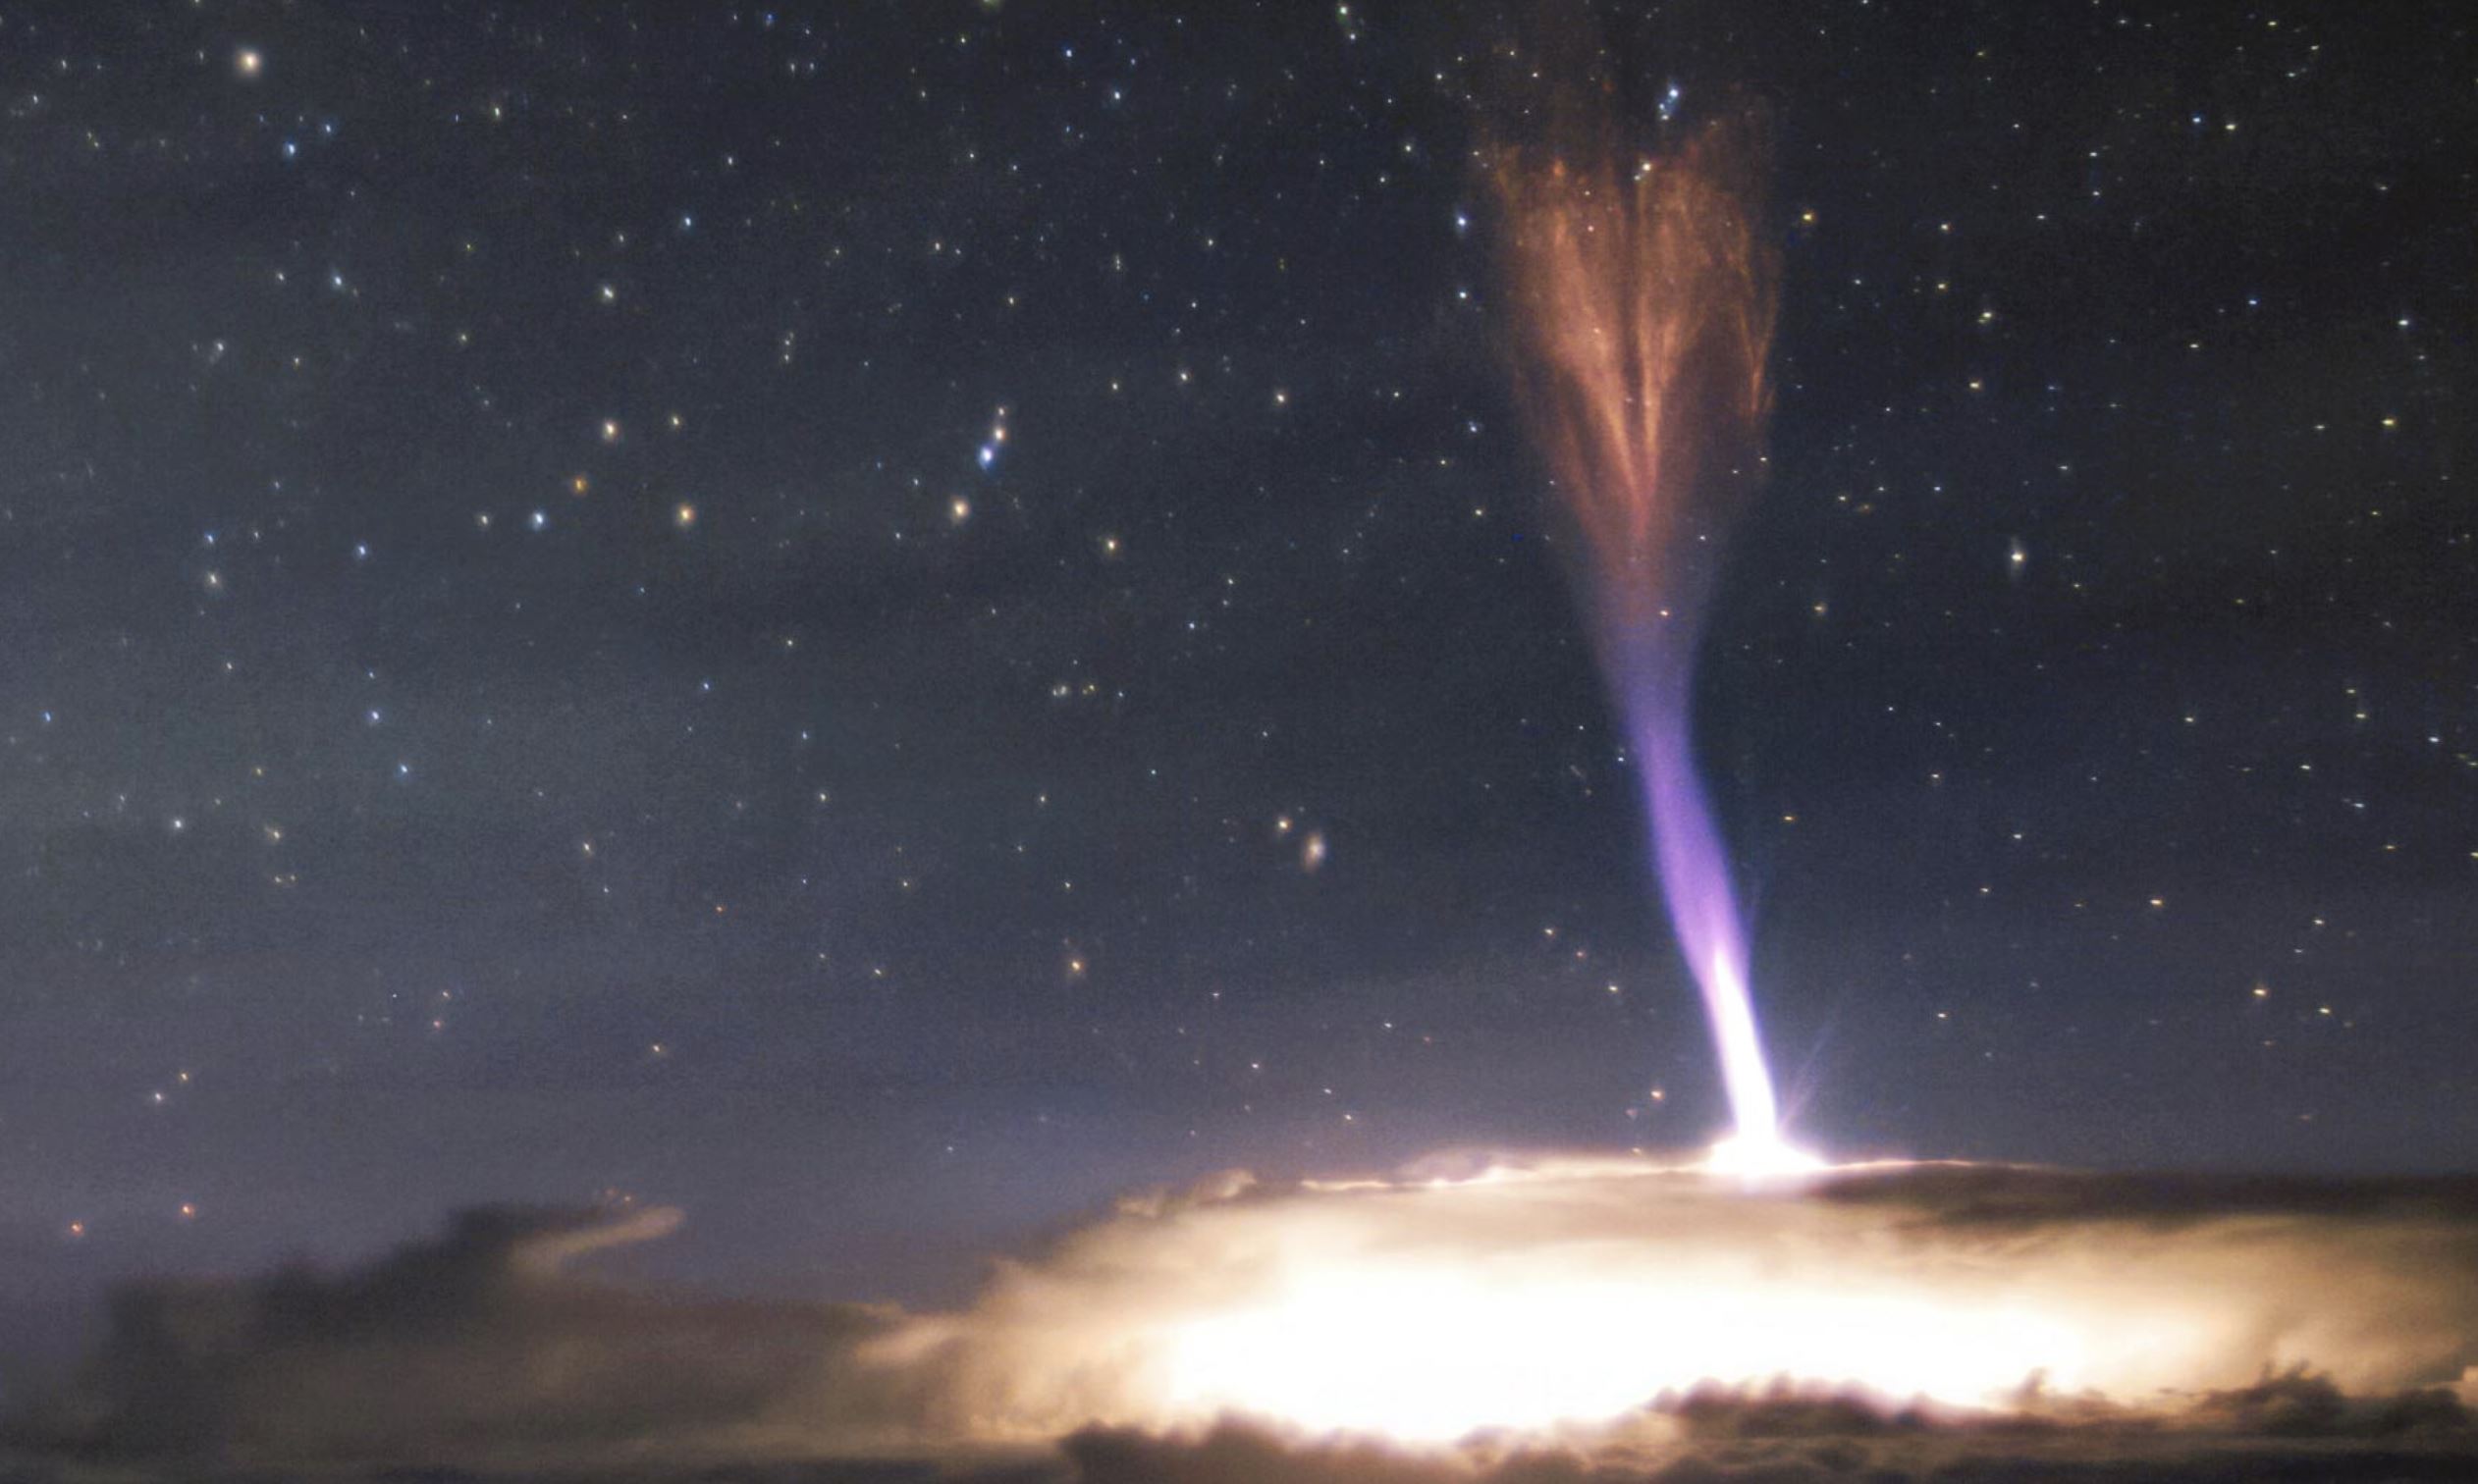 An image of a giant jet. This was captured by Gemini Norths Nighttime Cloud Camera. Credits: International Gemini Observatory/NOIRLab/NSF/AURA/A. Smith.